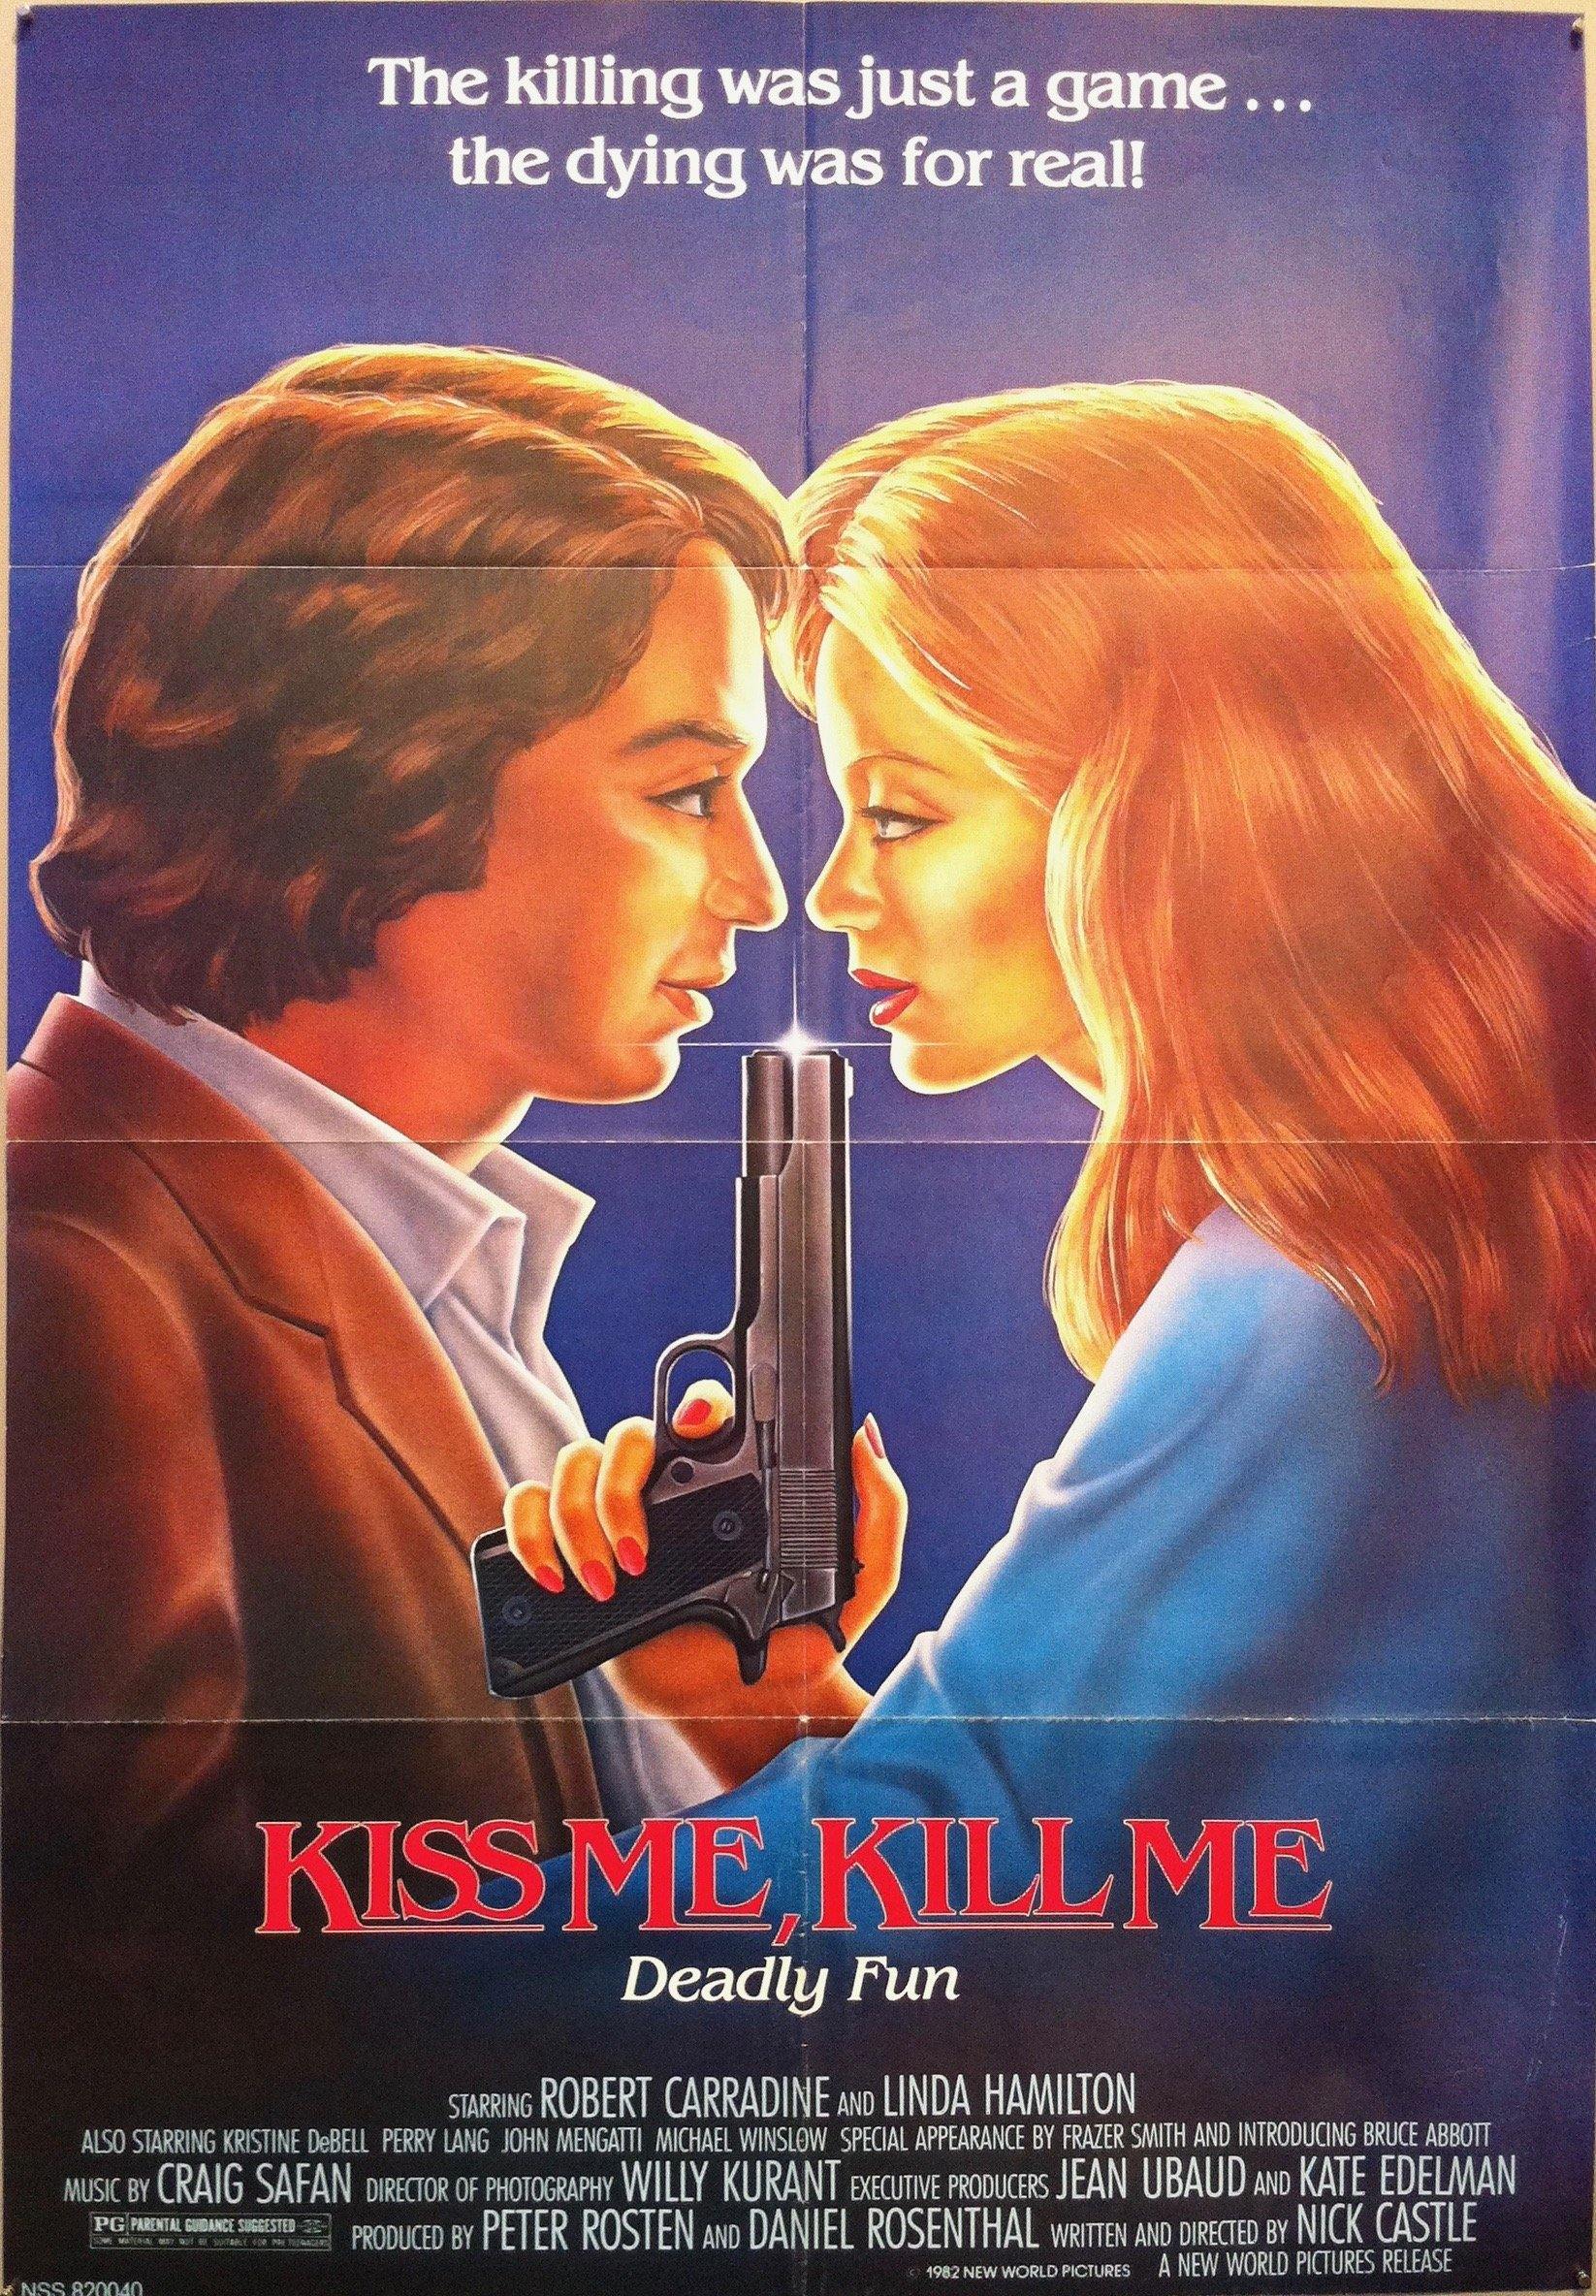 Tag: The Assassination Game (1982) French movie poster